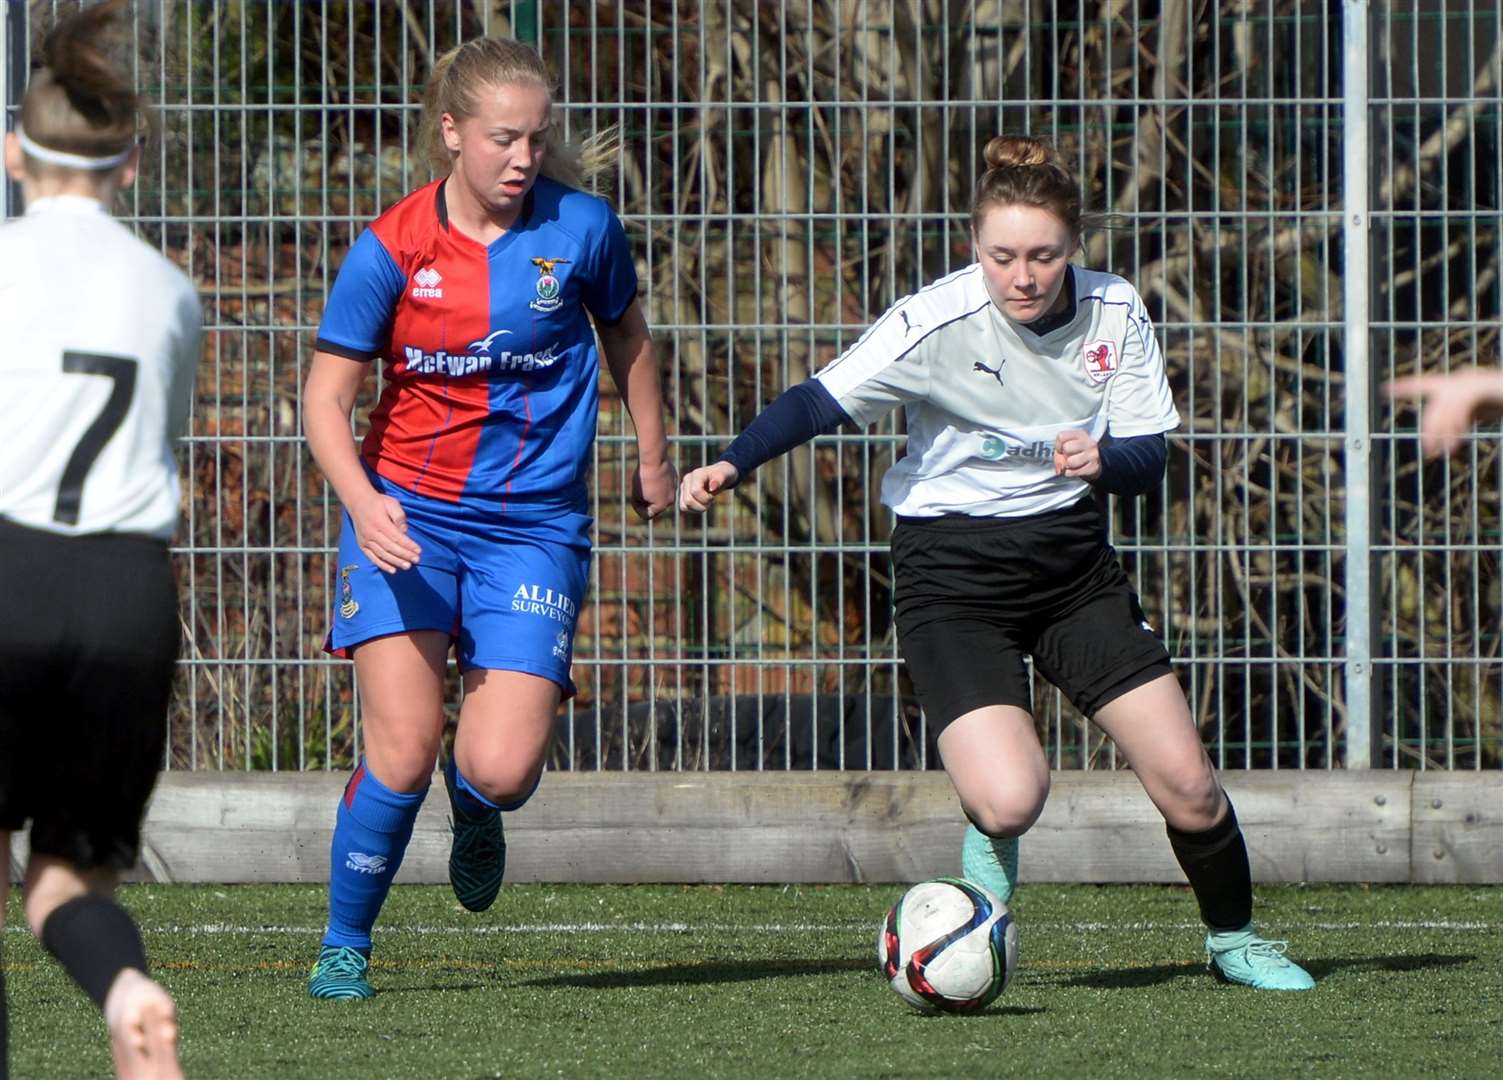 Inverness Caledonian Thistle Women's manager Karen Mason want to see her side perform more consistently before the end of the season.